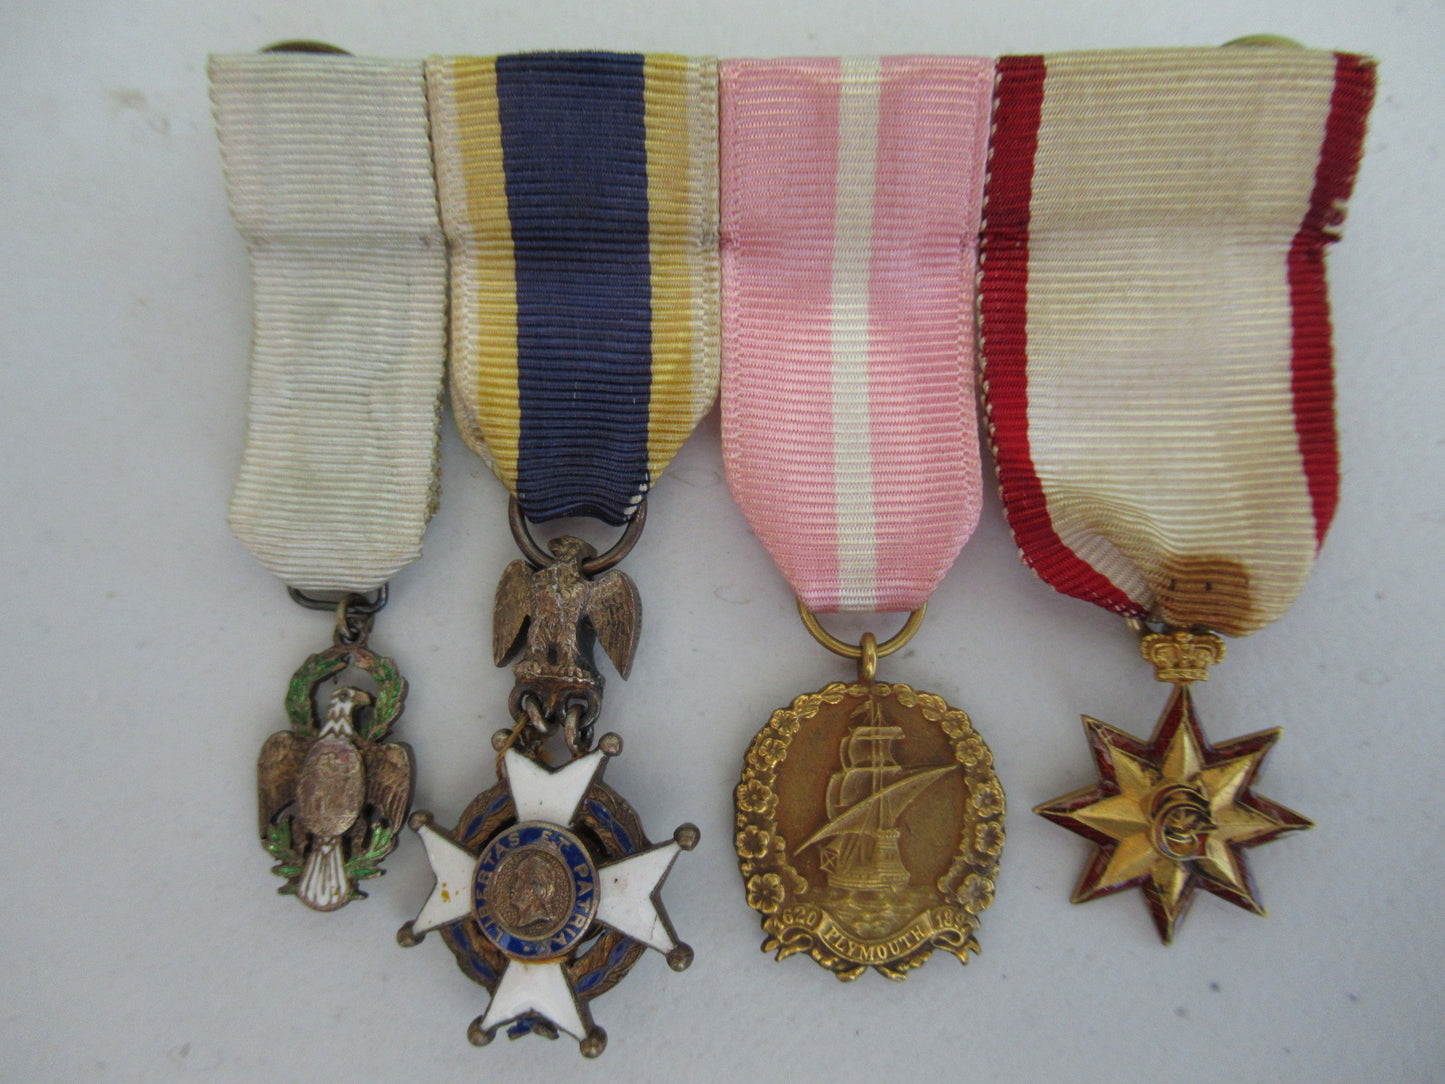 USA COMPLETE GROUP OF MEDALS BELONGING TO GENERAL HUNTINGTON HILLS FEATURING A PURPLE HEART FOR VALOR AND MANY OTHER NAMED MEDALS